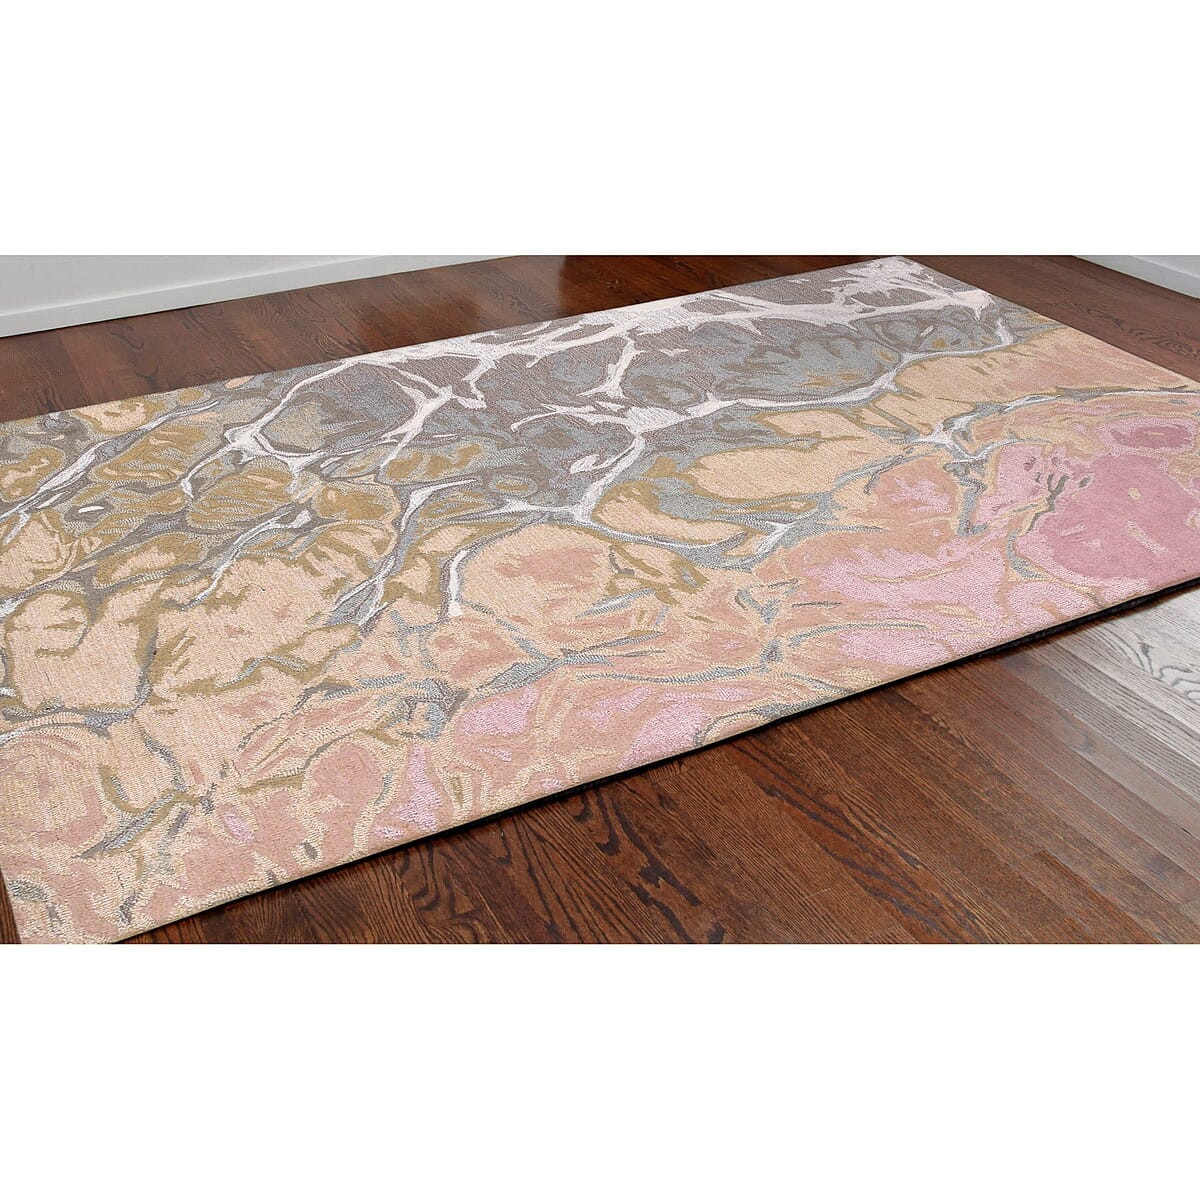 Liora Manne Corsica Water 9146/37 Blush Organic / Abstract Area Rug